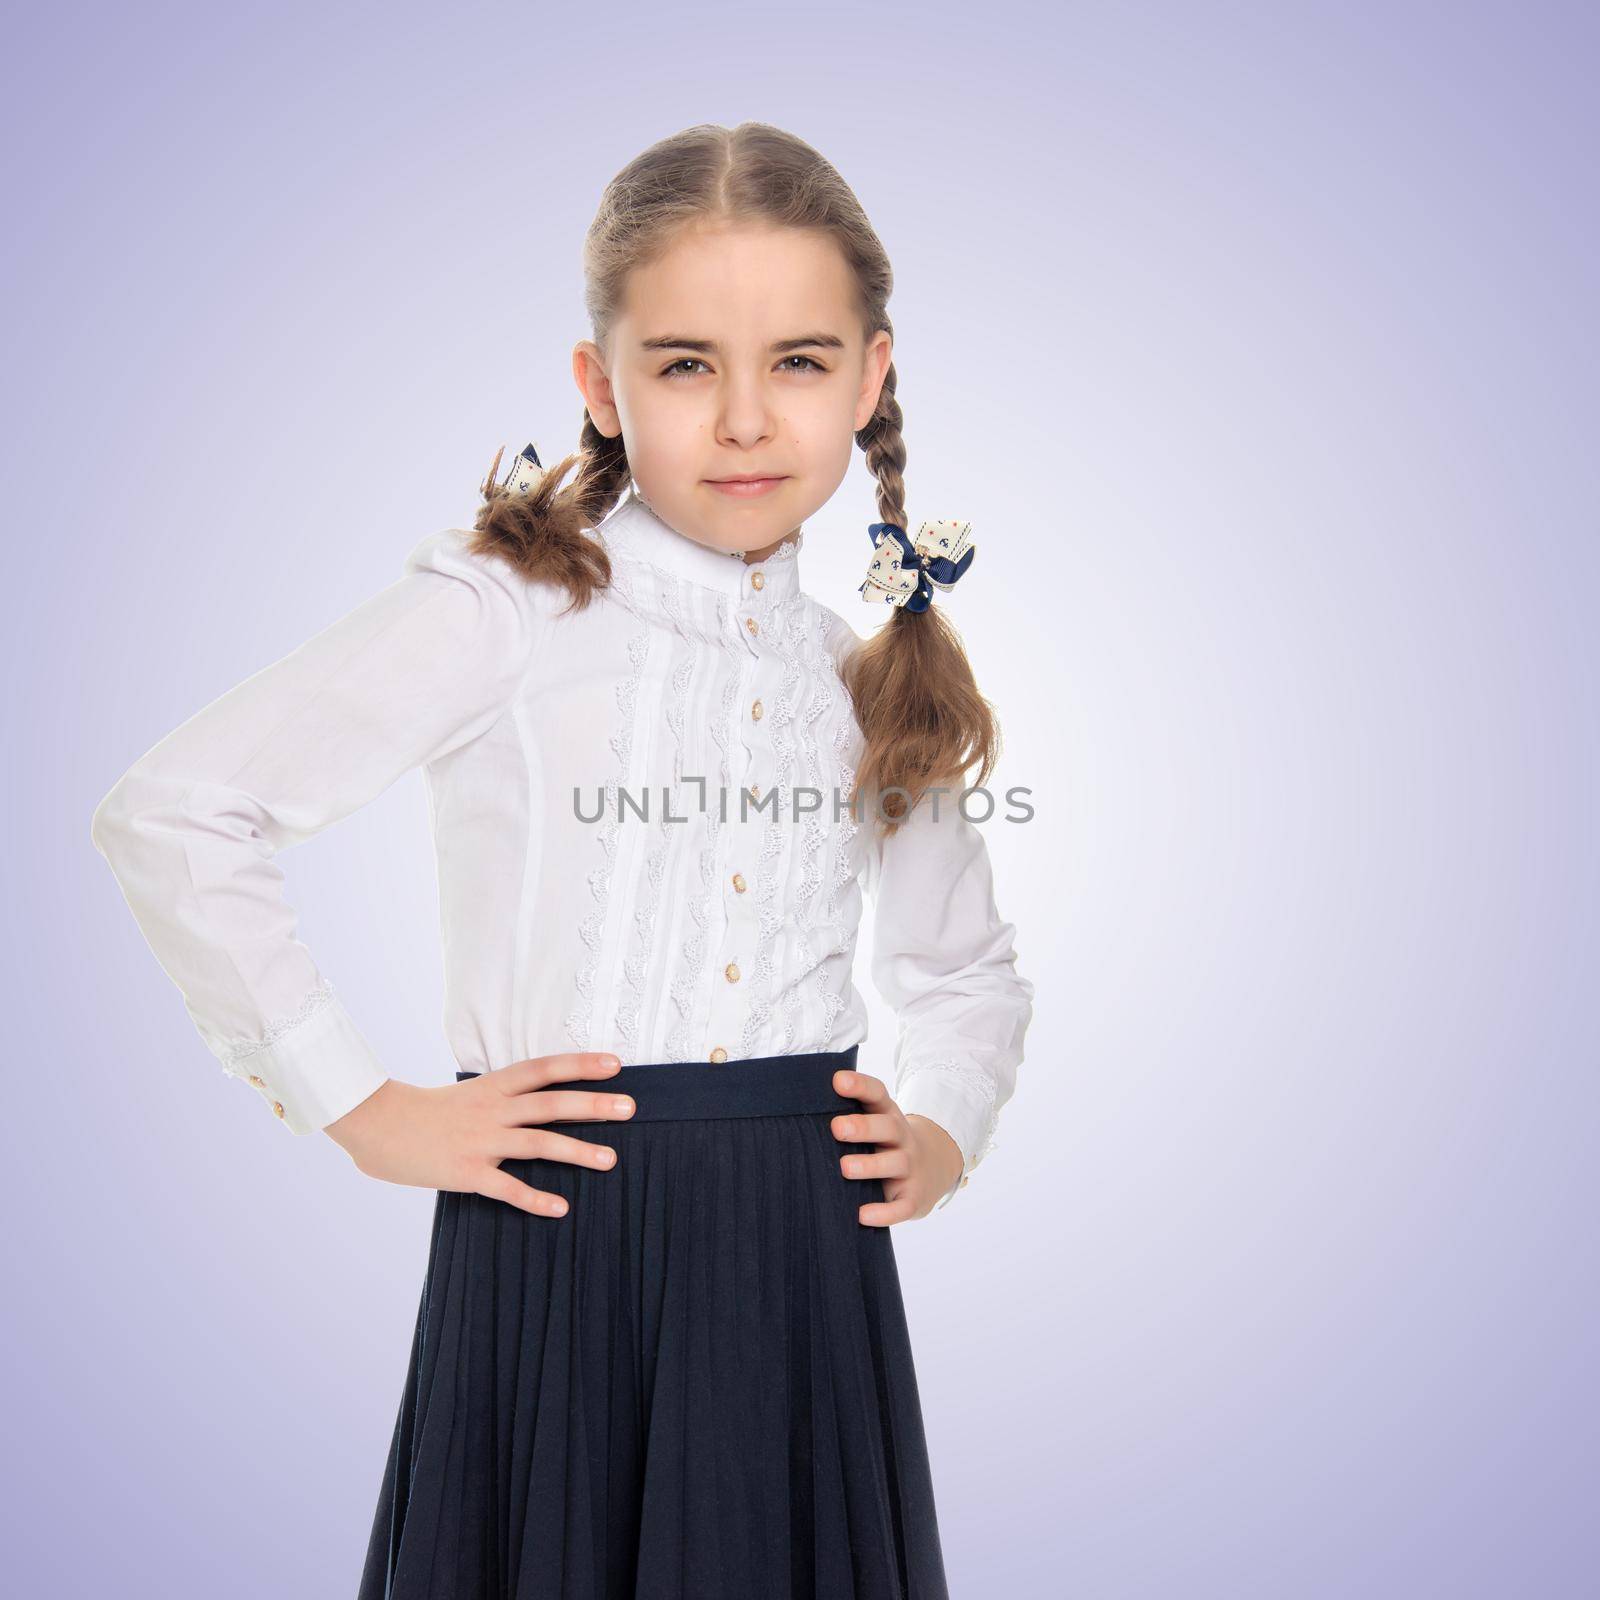 A beautiful little schoolgirl girl in a white blouse and black long skirt, with neatly braided pigtails on her head.She is posing in front of the camera, her hands on her hips.Purple gradient background.